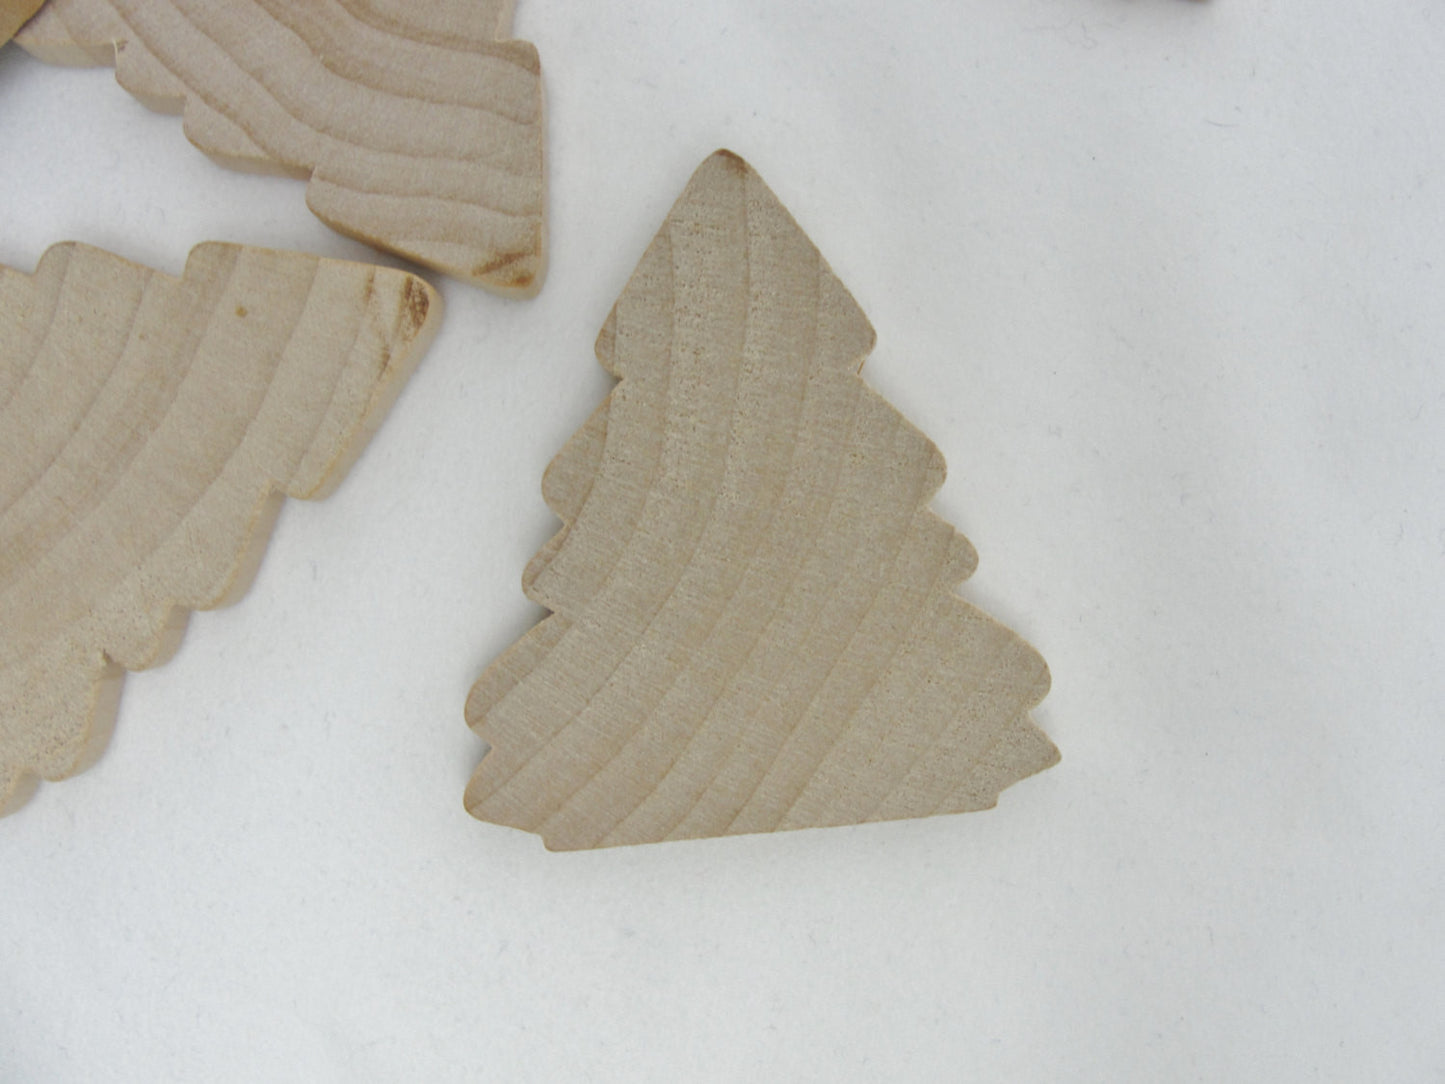 Wooden tree cutout 2 1/4" tall set of 6 - Wood parts - Craft Supply House